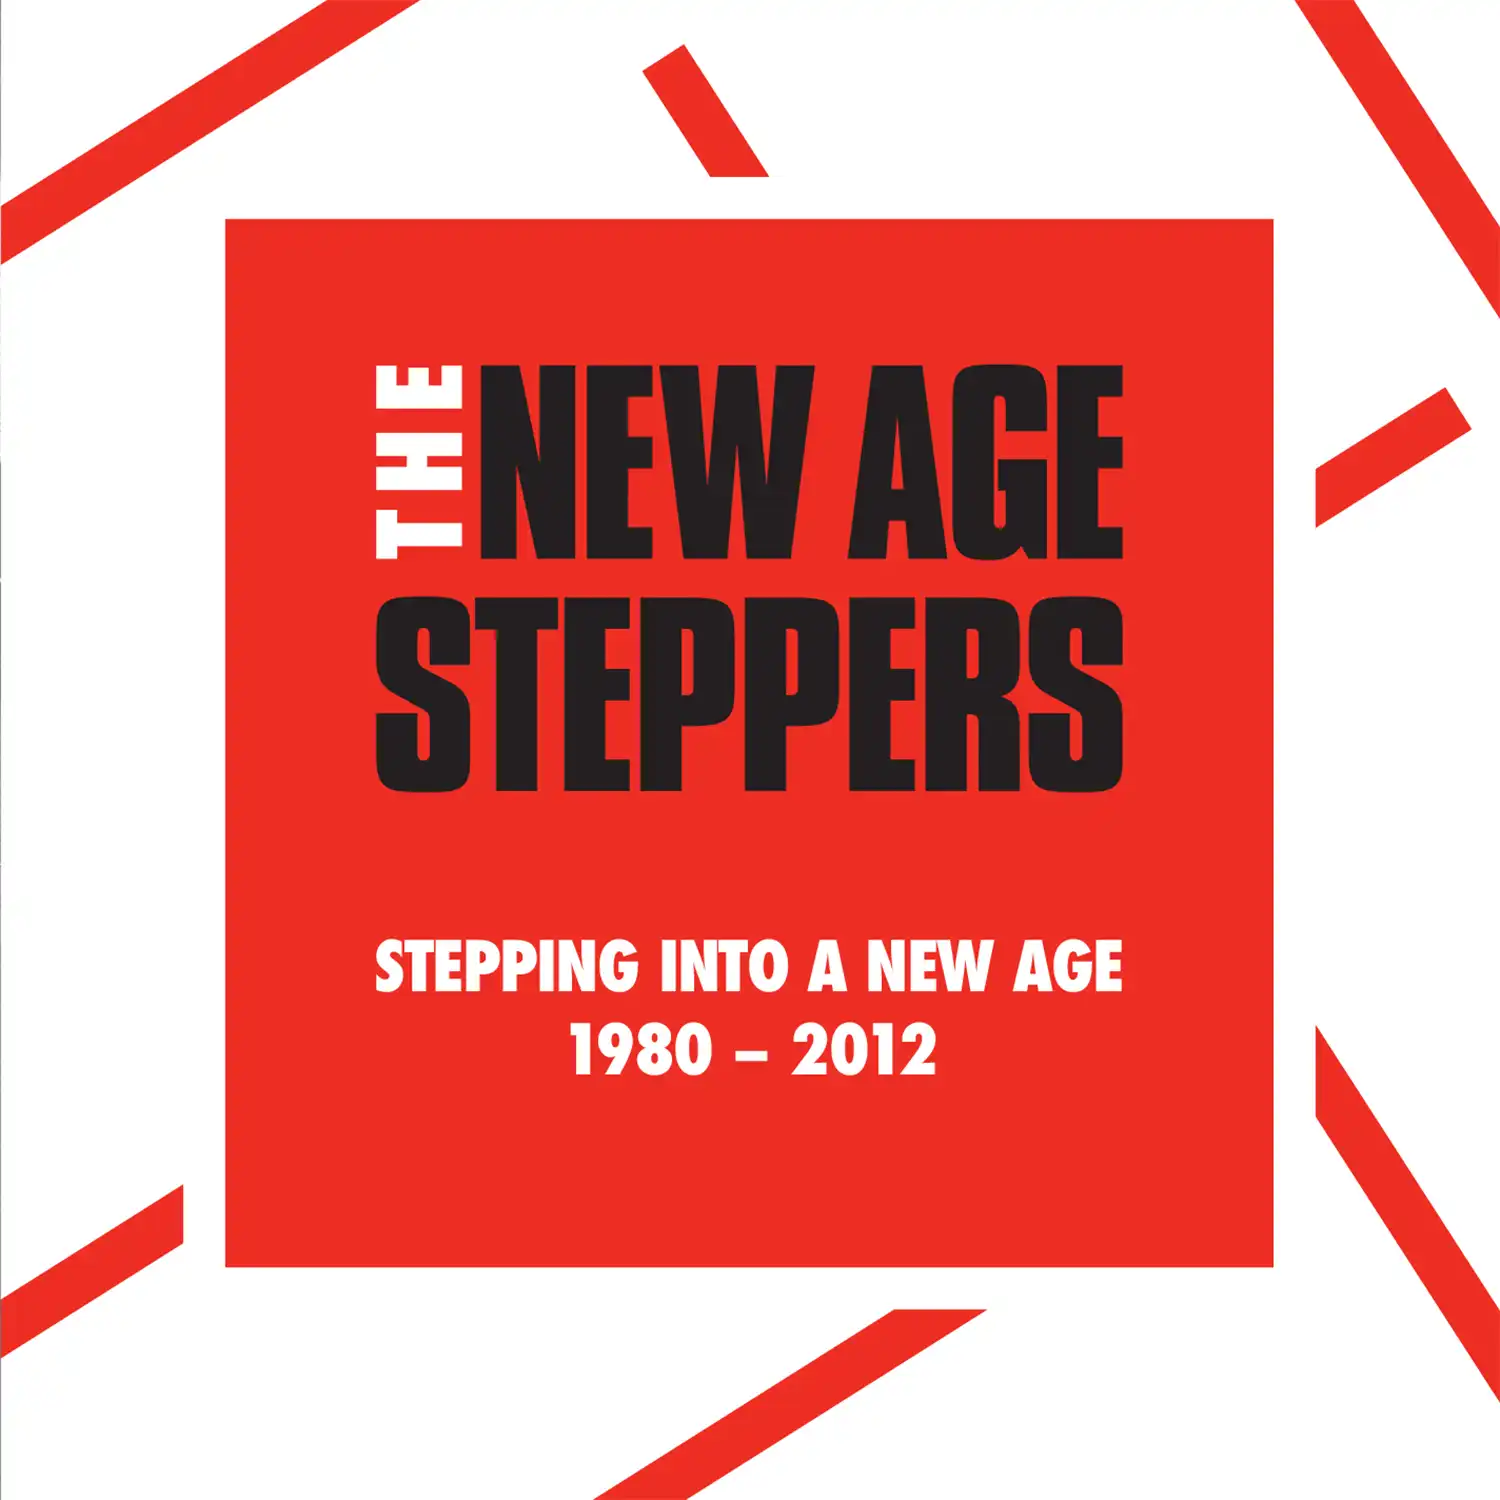 NEW AGE STEPPERS / STEPPING INTO A NEW AGE 1980 - 2012 限定 国内仕様5CD(BOX)+Tシャツ(S)  